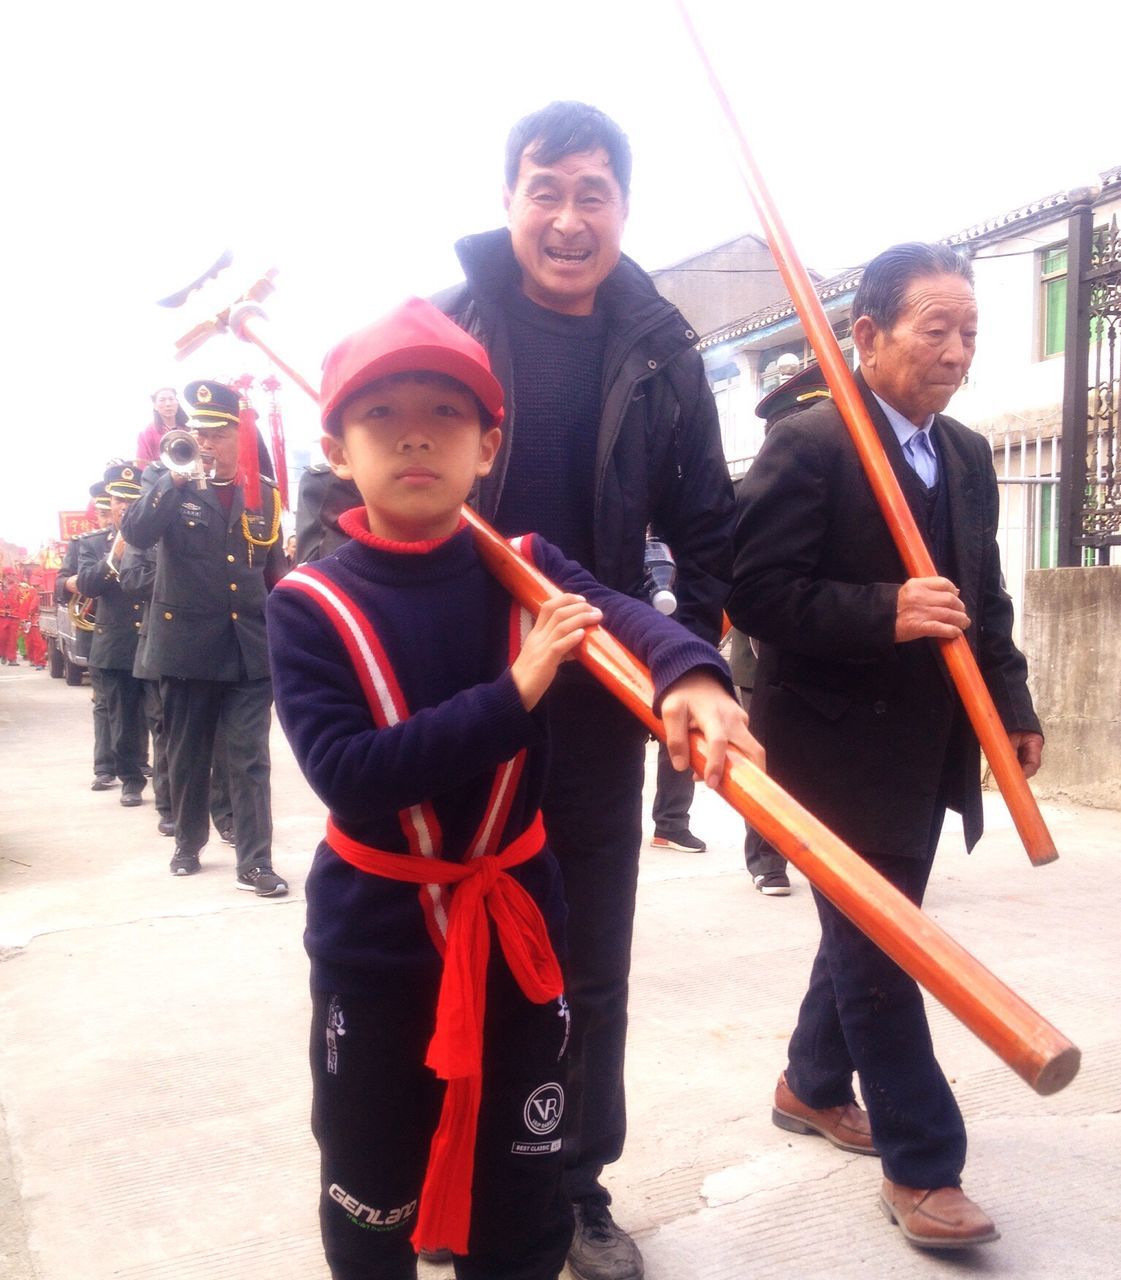 child, holding, childhood, people, leisure activity, outdoors, men, togetherness, sword, warrior - person, weapon, adult, cold temperature, day